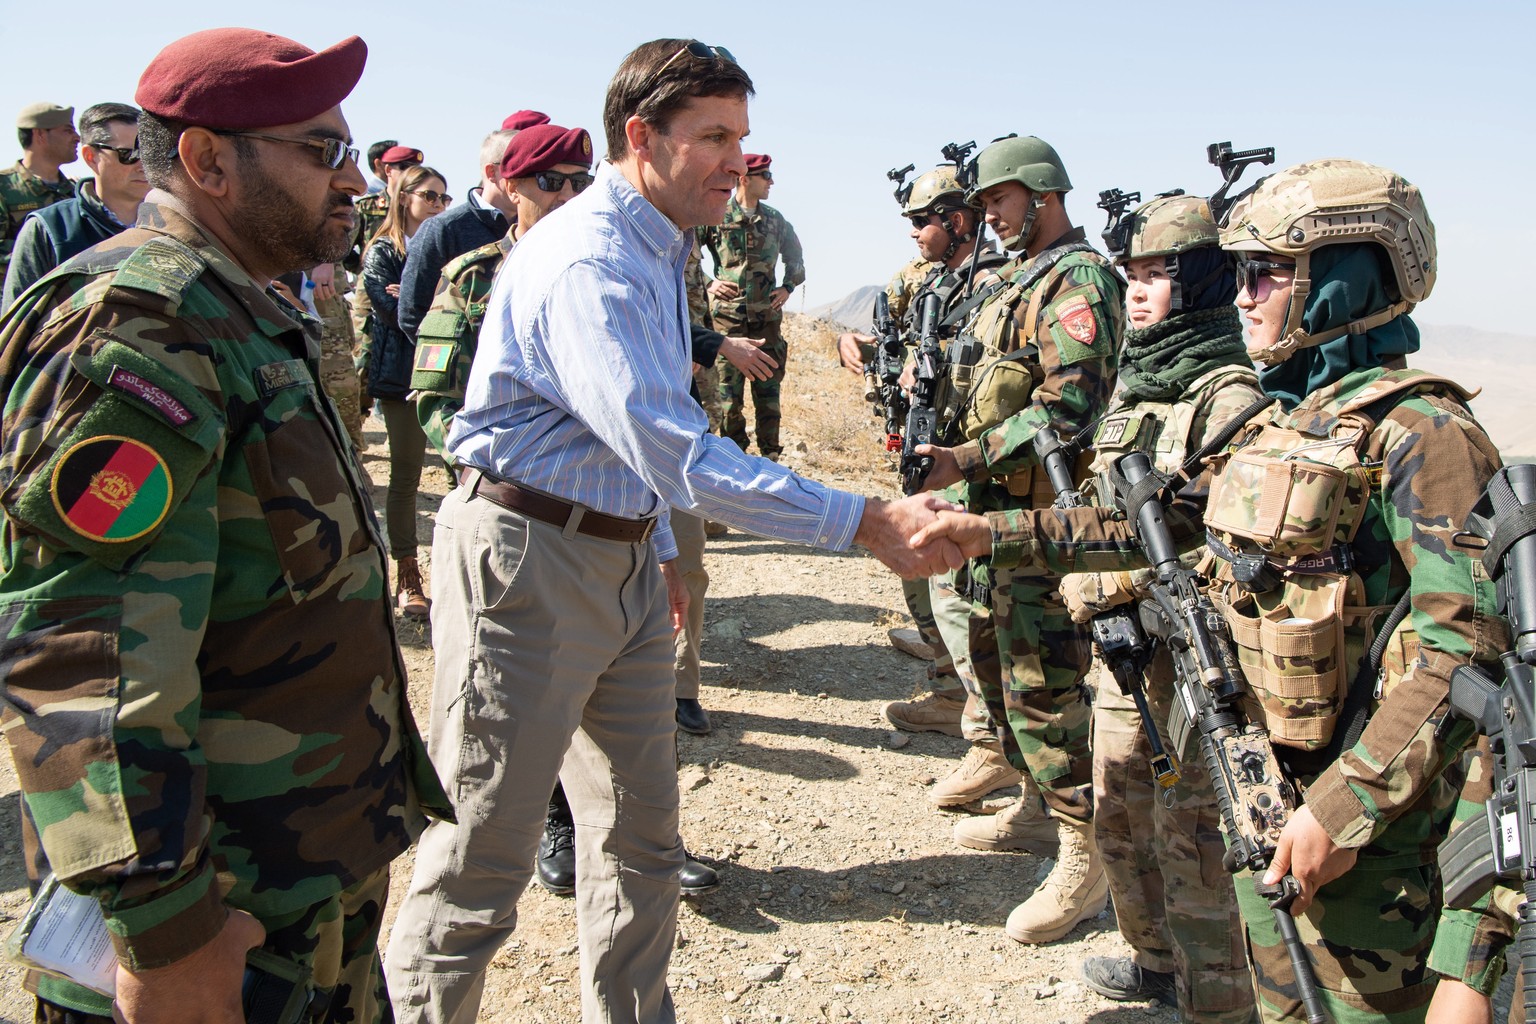 epa07940226 A handout photo made available by the US Department of Defense (DOD) shows US Defense Secretary Mark T. Esper (C) meeting with members of the Afghan special forces to observe their trainin ...